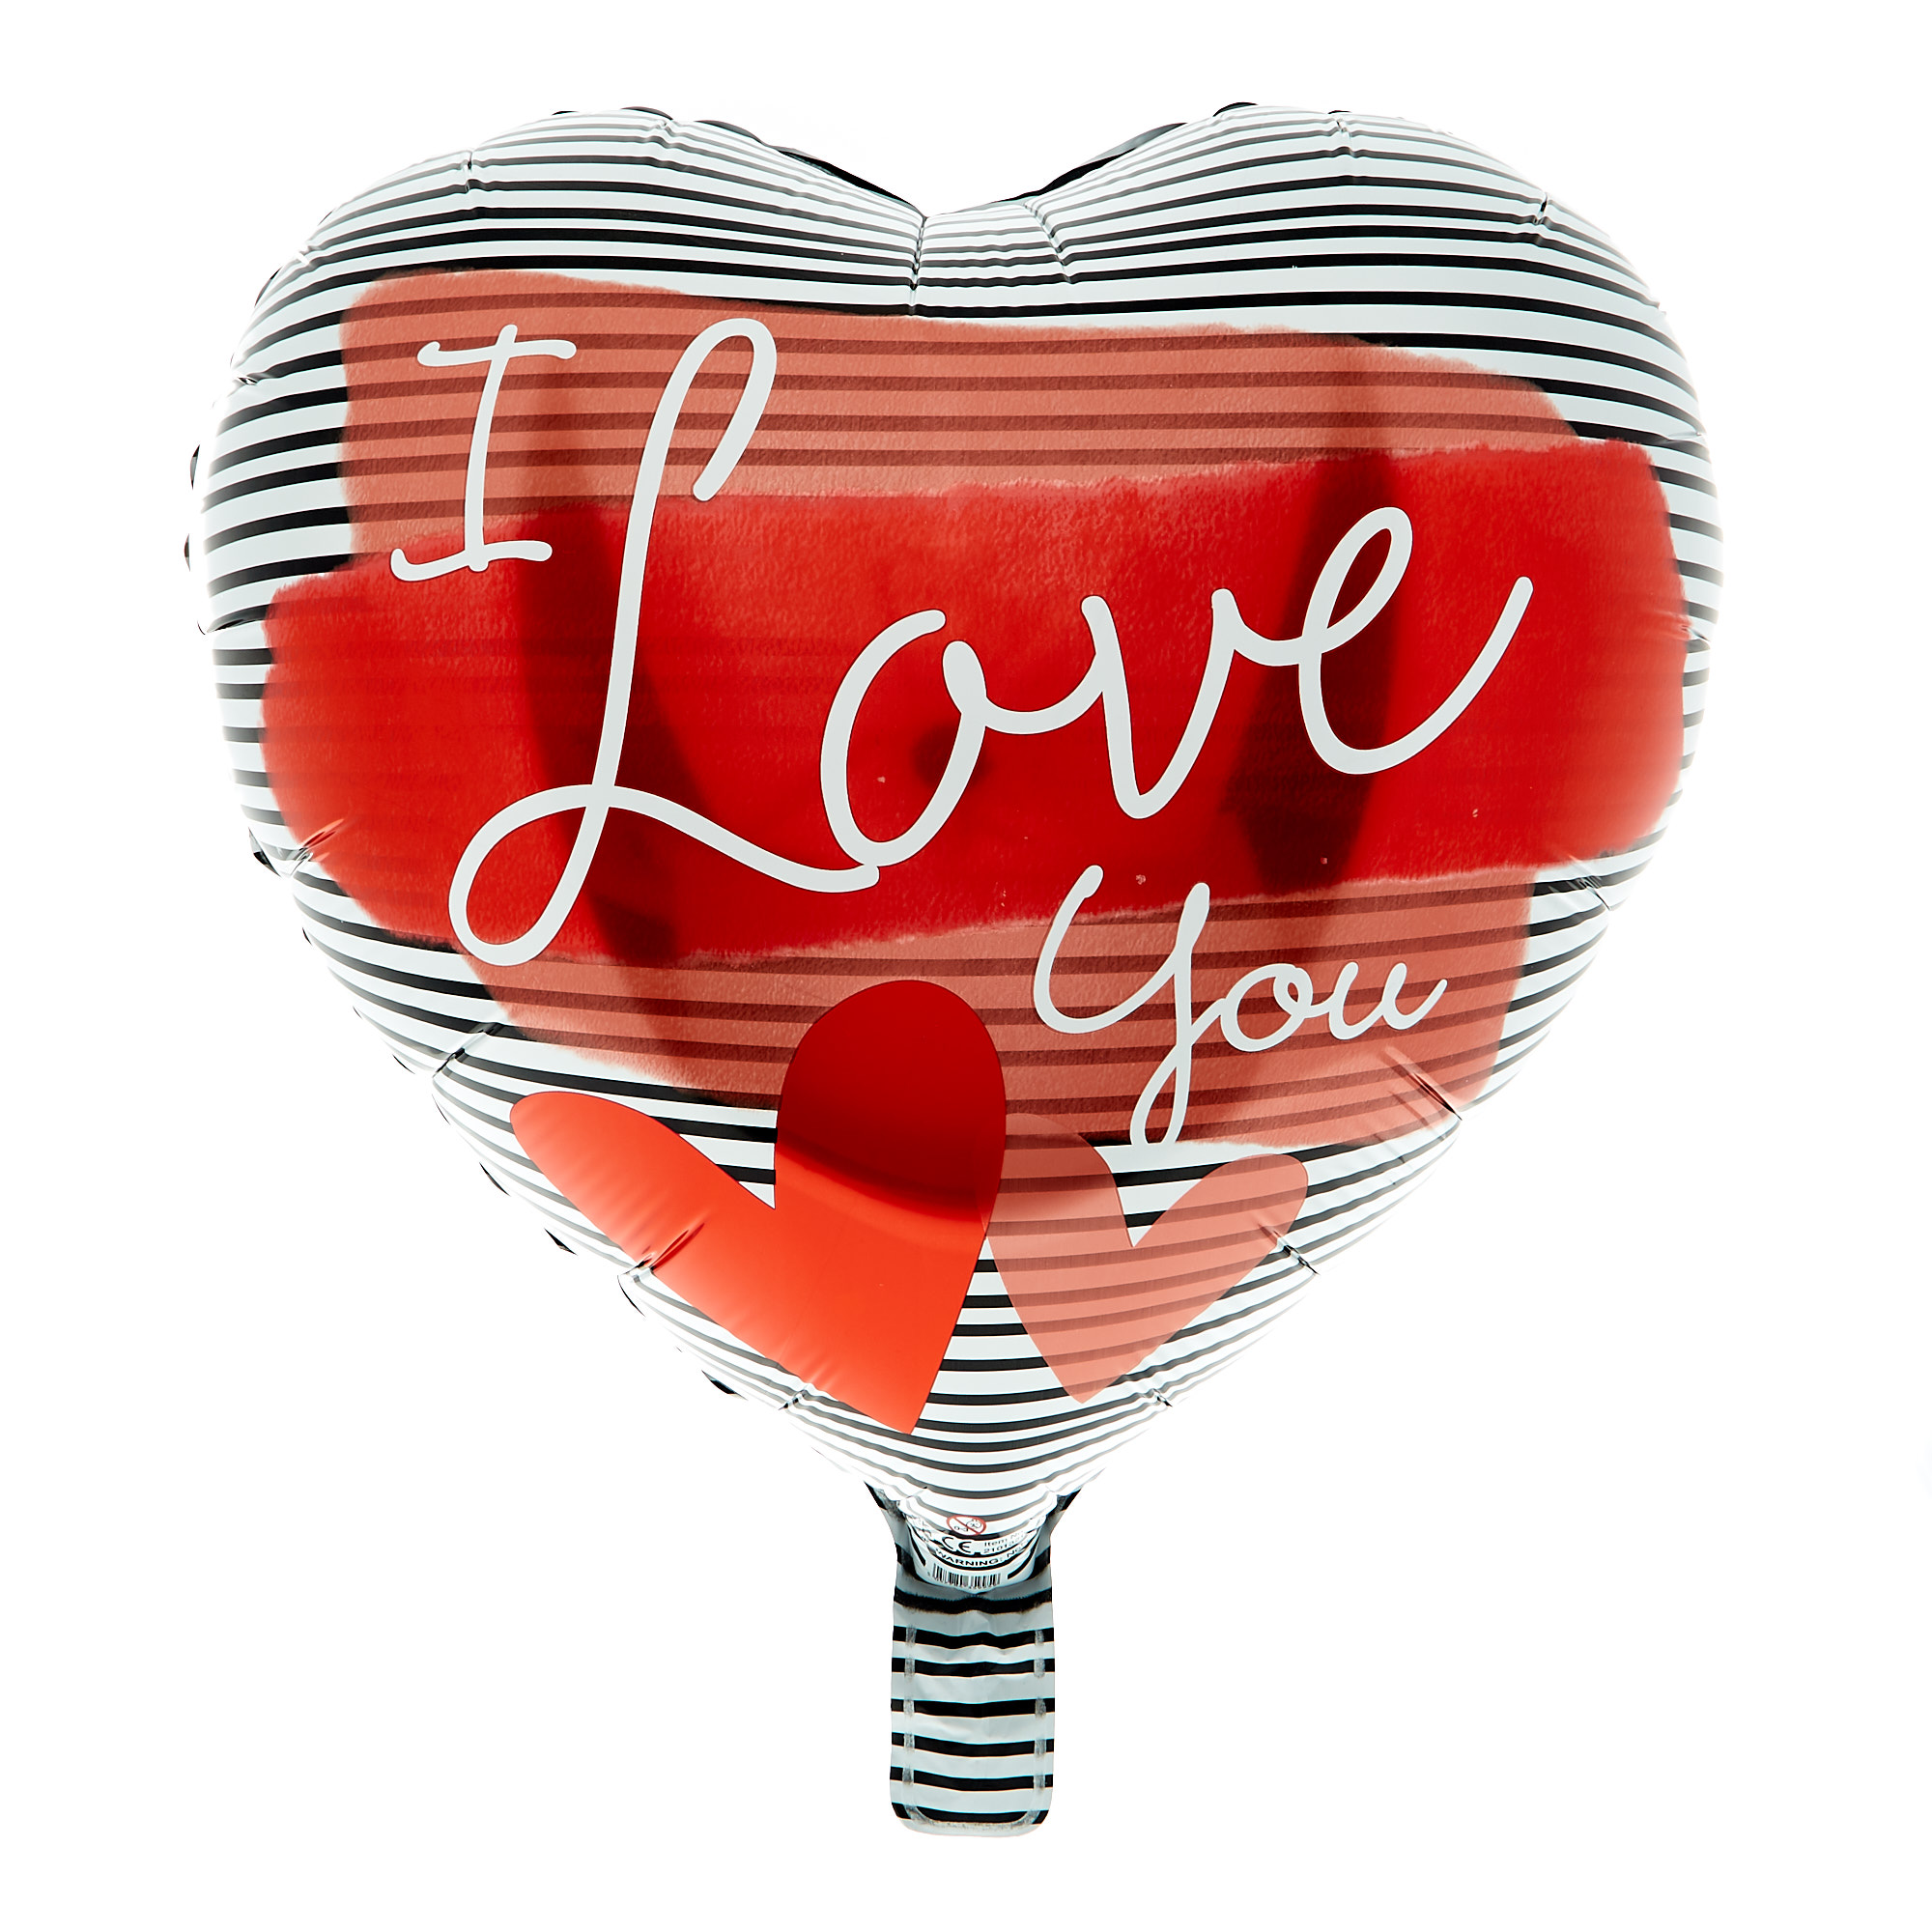 I Love You Heart Balloon & Lindt Chocolate Box - FREE GIFT CARD!